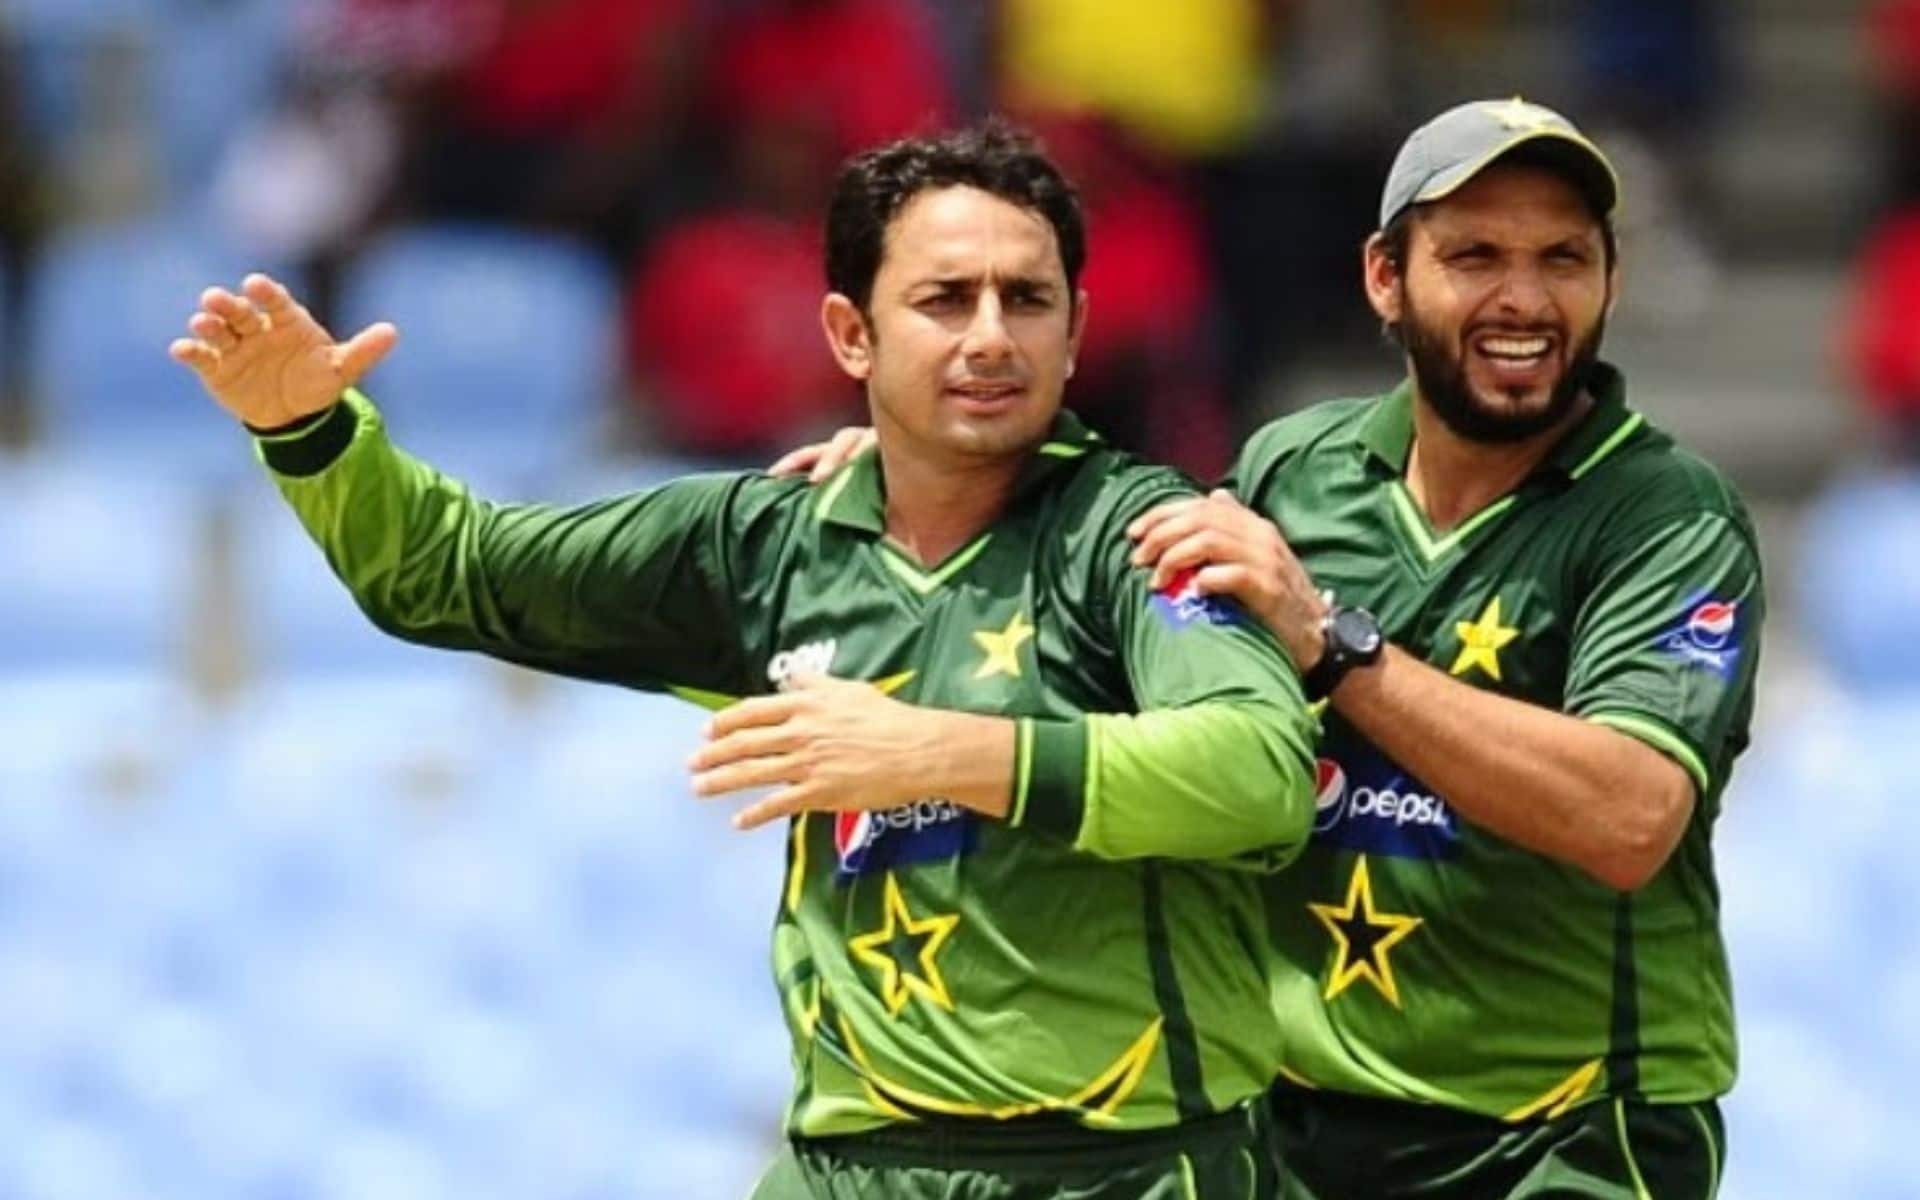 Saeed Ajmal and Shahid Afridi are among the five highest wicket-takers in T20 World Cups (x.com)